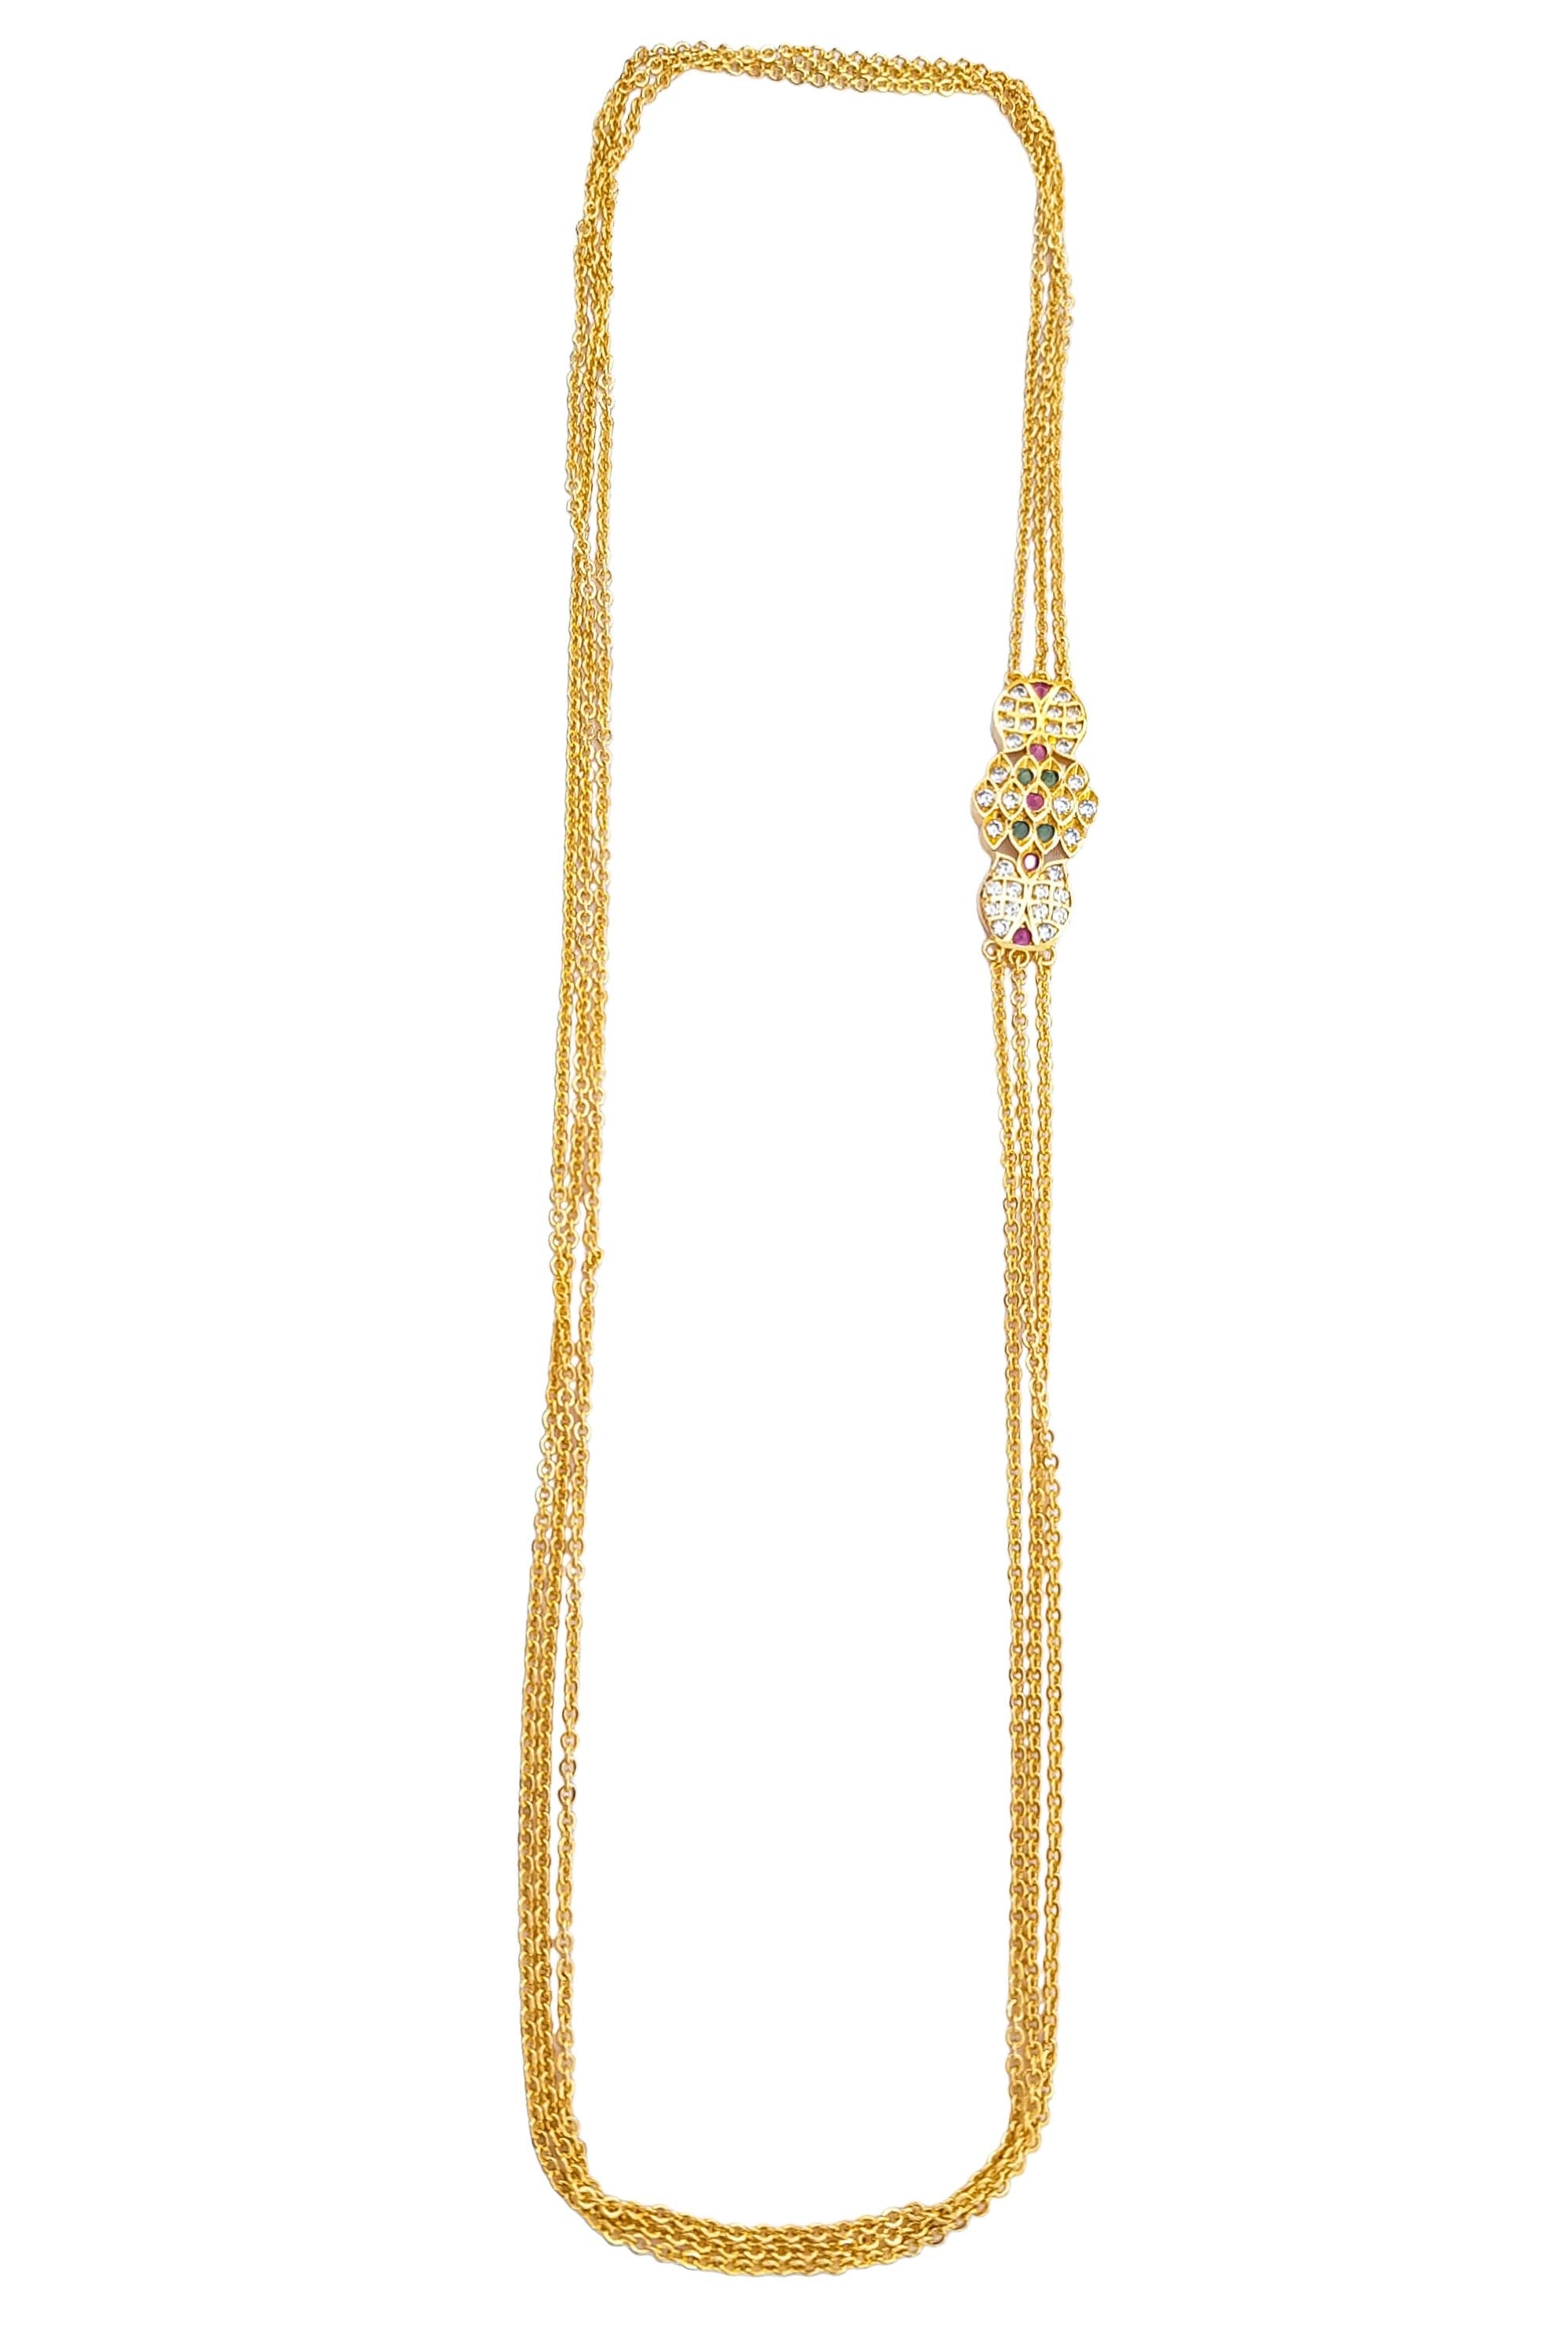 MicroGold Plated CZ Studded 3 Layer Mopu Chain 18142N